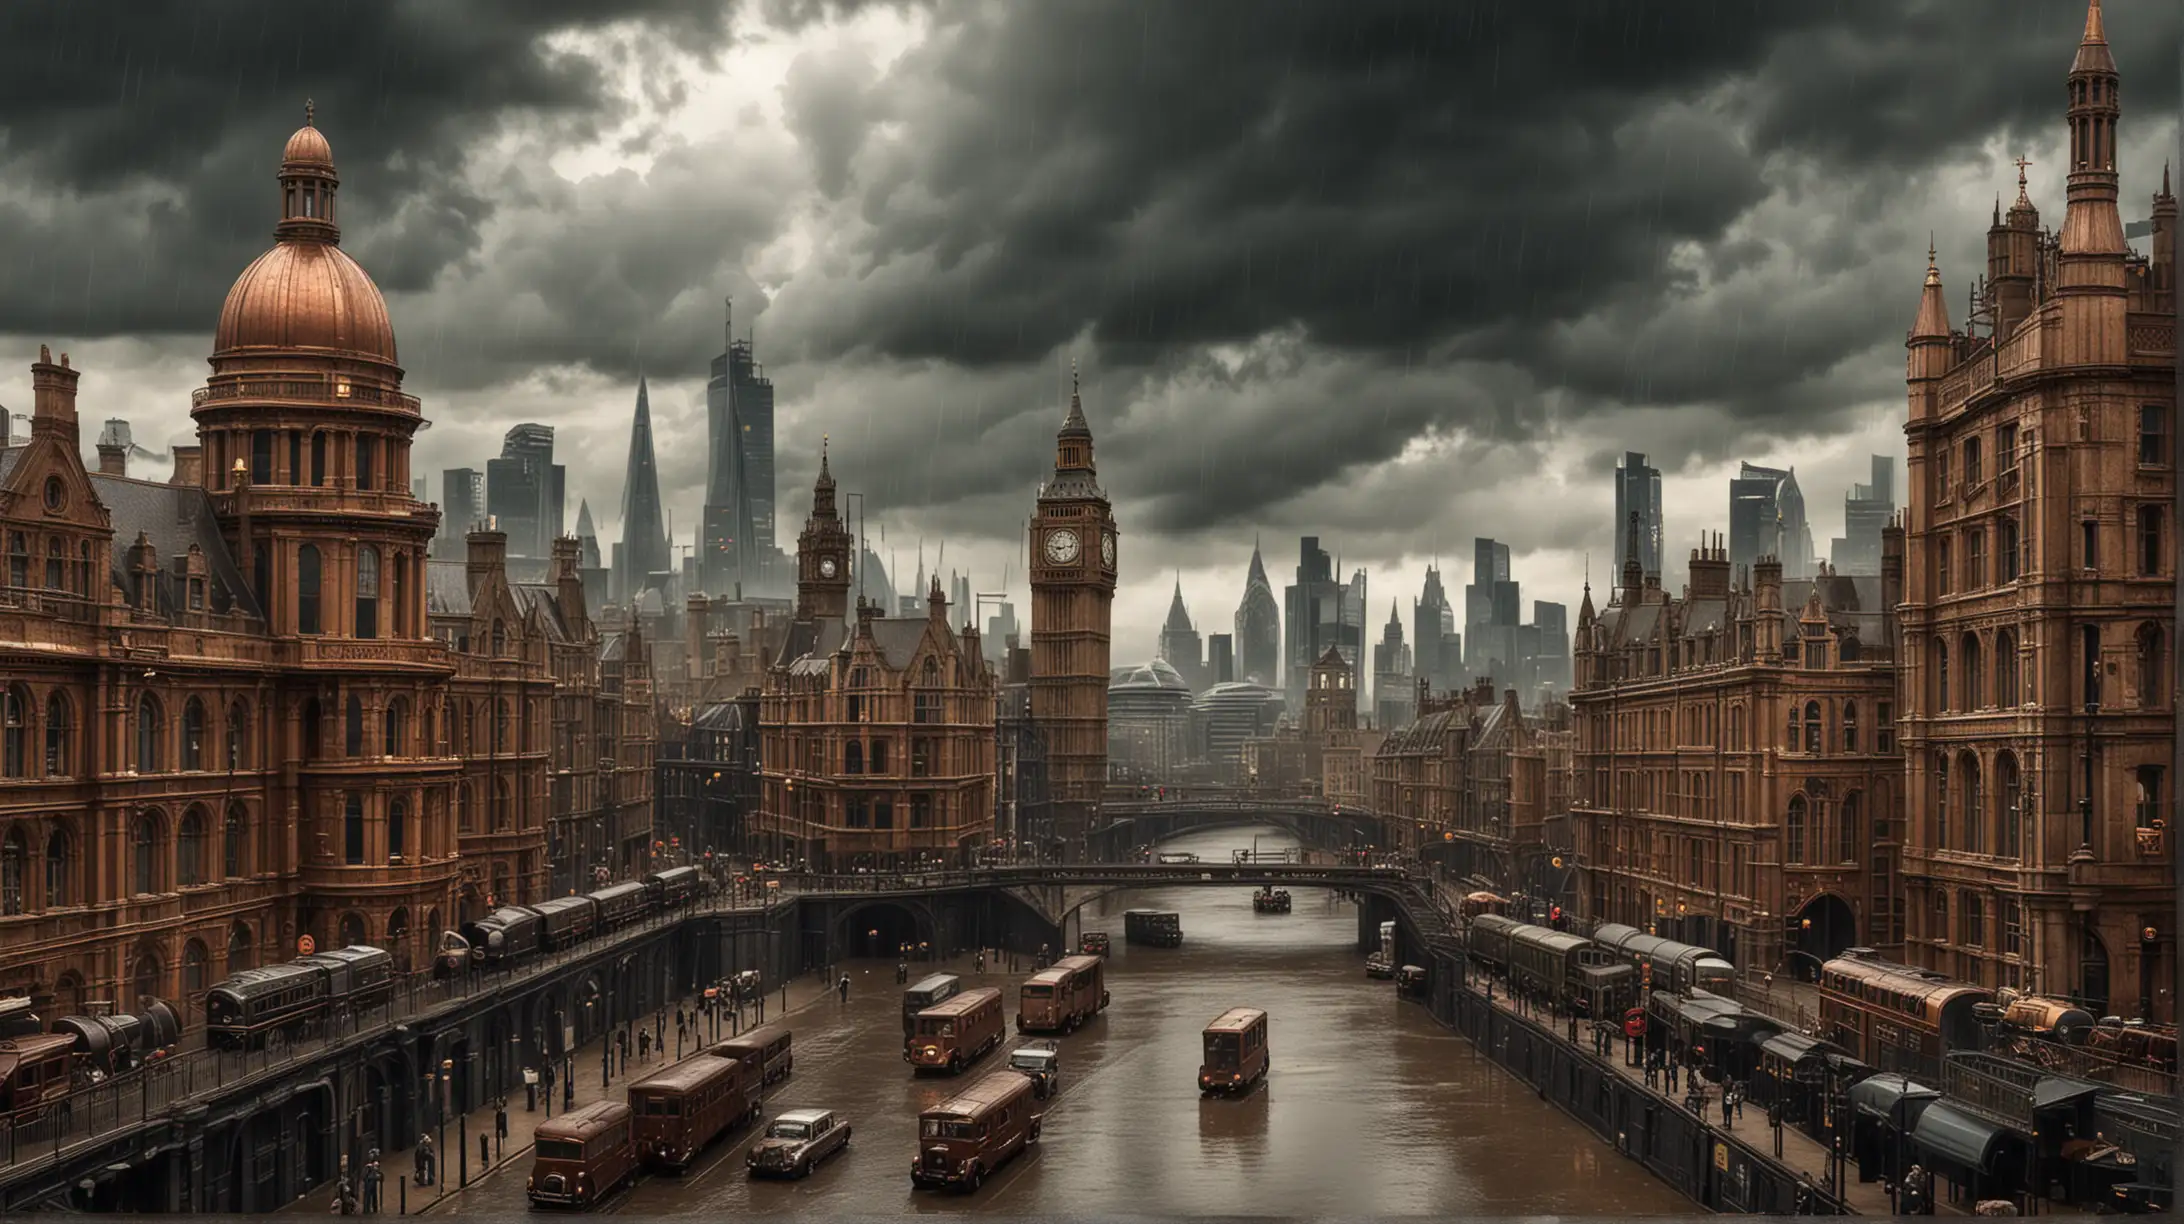 Steampunk London in Copper and Brass under Rainy Skies